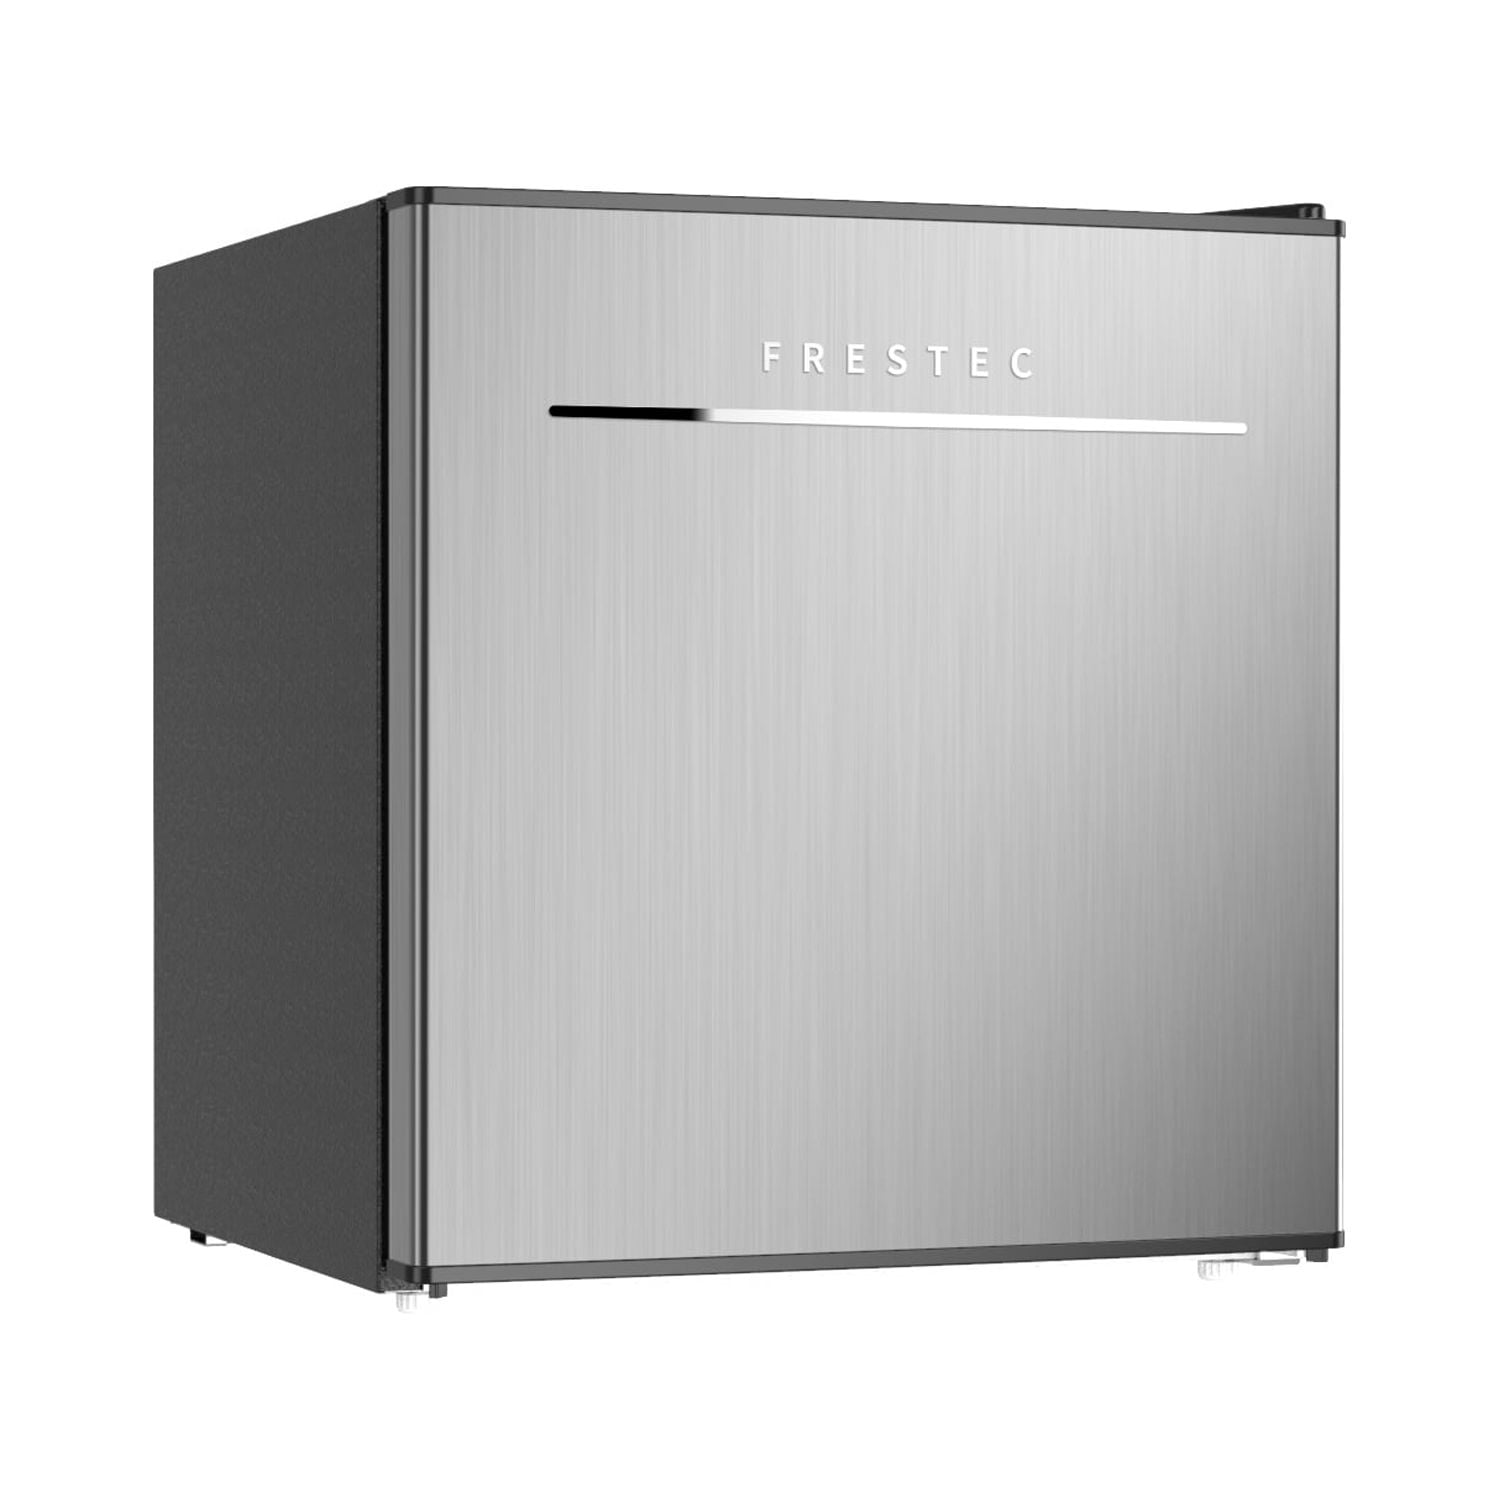 Mini Fridge with Freezer. 1.7 Cu.Ft Small Refrigerator, 6 Adjustable  Thermostat Control, One-Touch Defrost, Reversible Doors Design,  Dorm/Office/Home Refrigerator, Green With Handle 